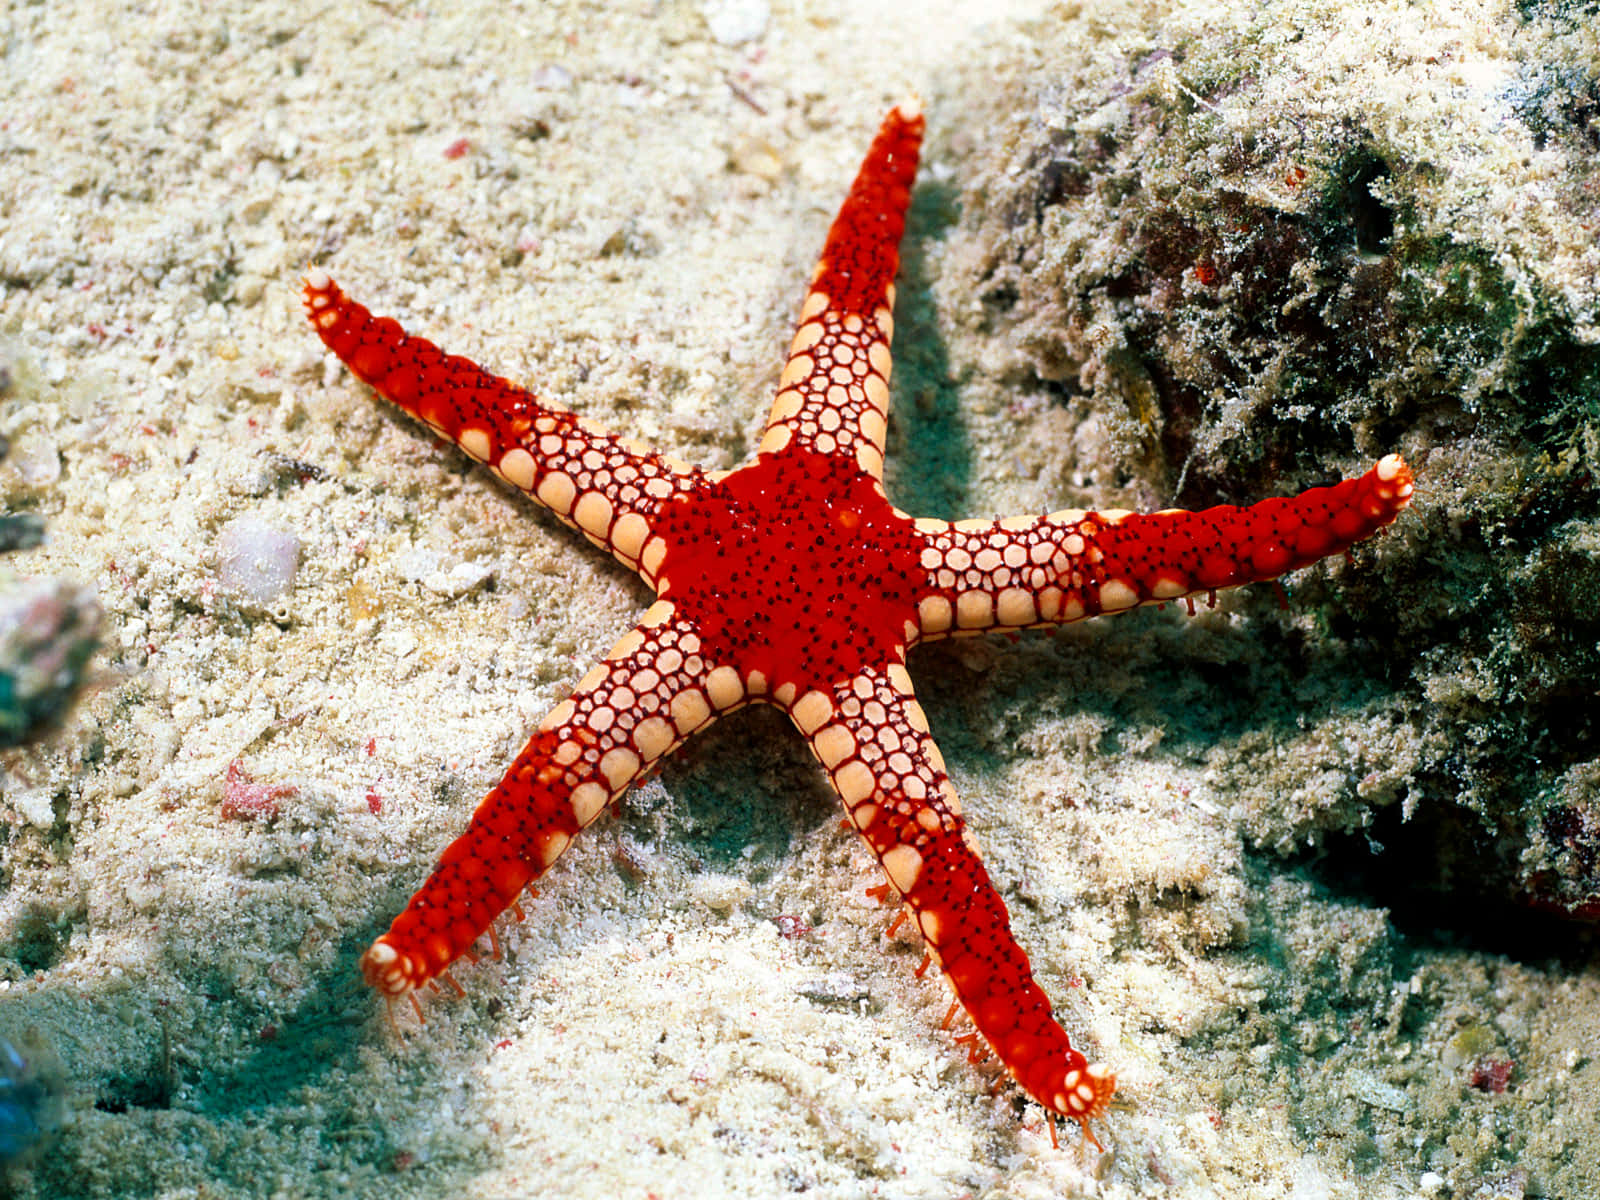 A Starfish Crawling in the Sand